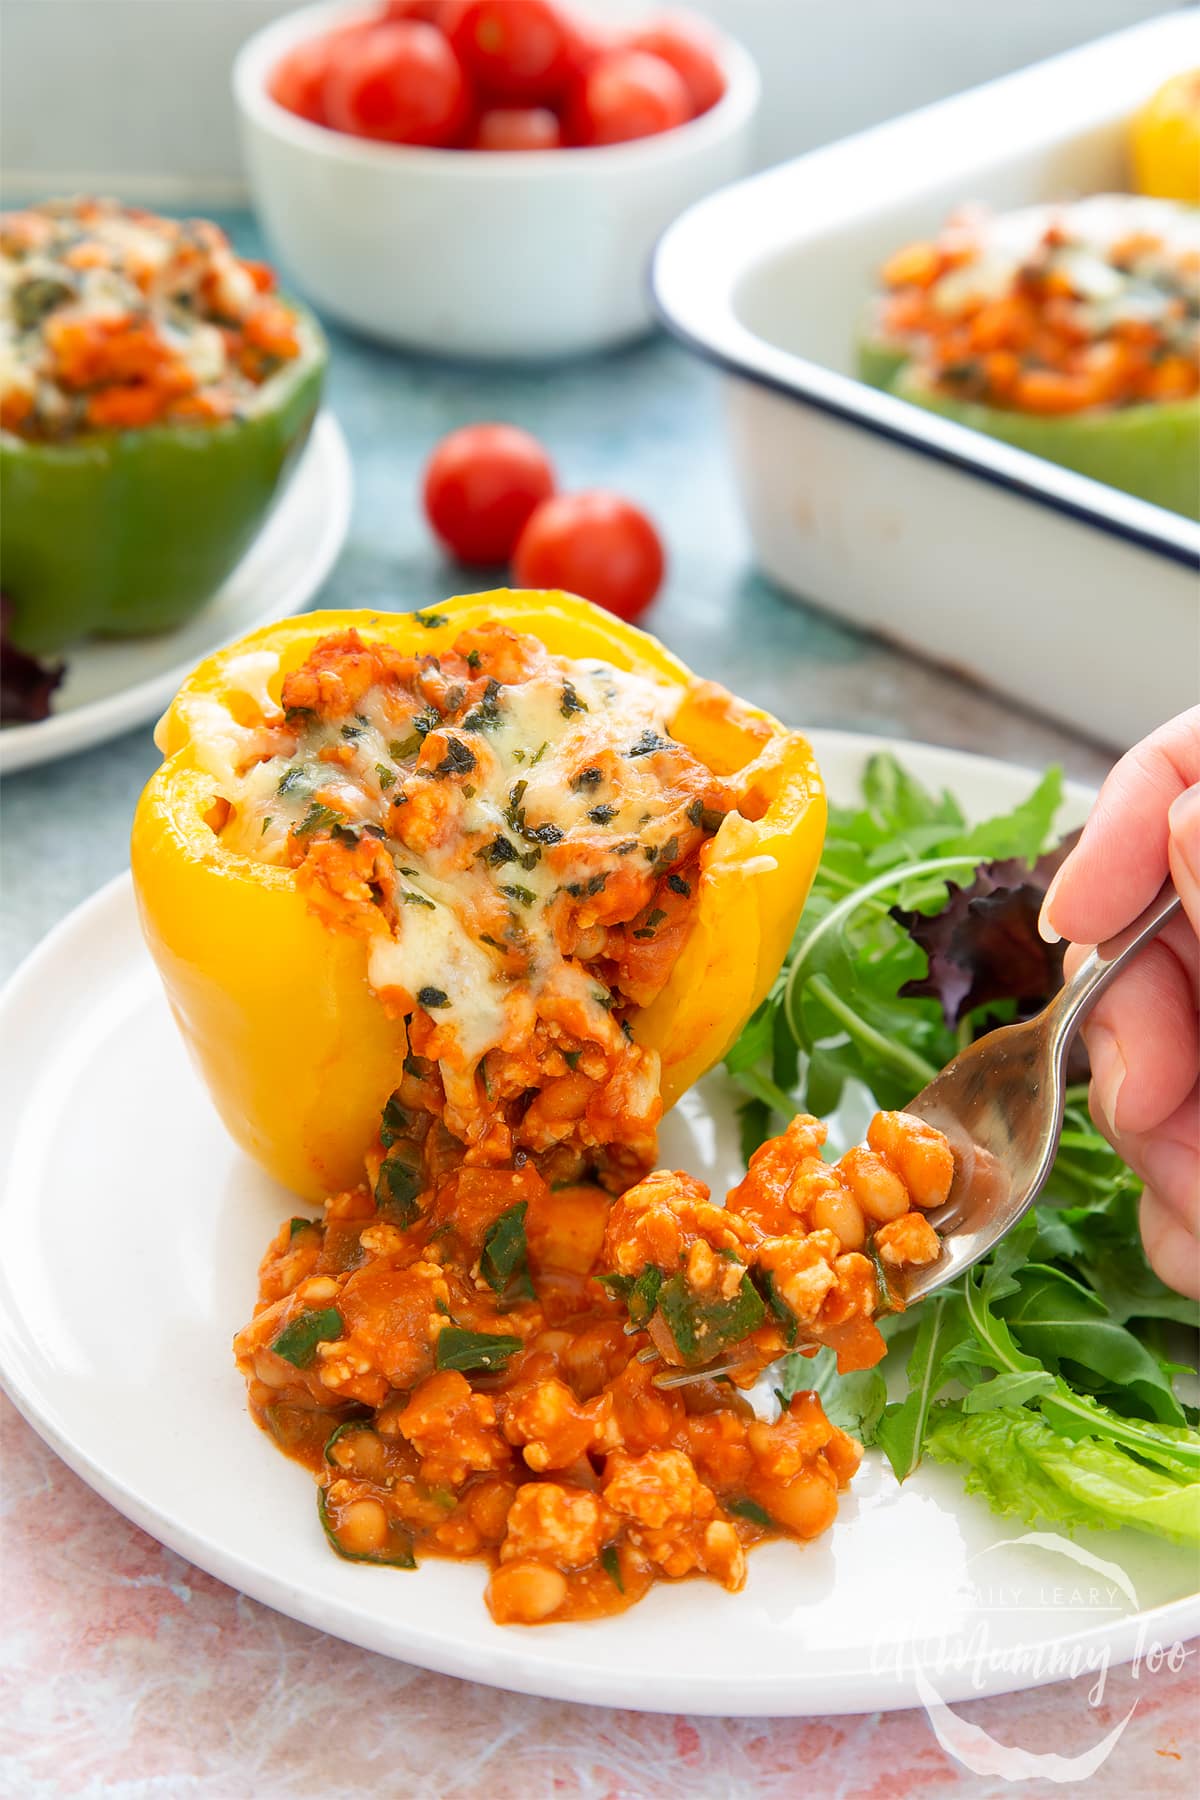 A yellow pepper stuffed with turkey mince, vegetables and baked beans with melted cheese on top. The filling spills onto the white plate and a fork delves into it. More baked bean stuffed peppers are shown in the background.